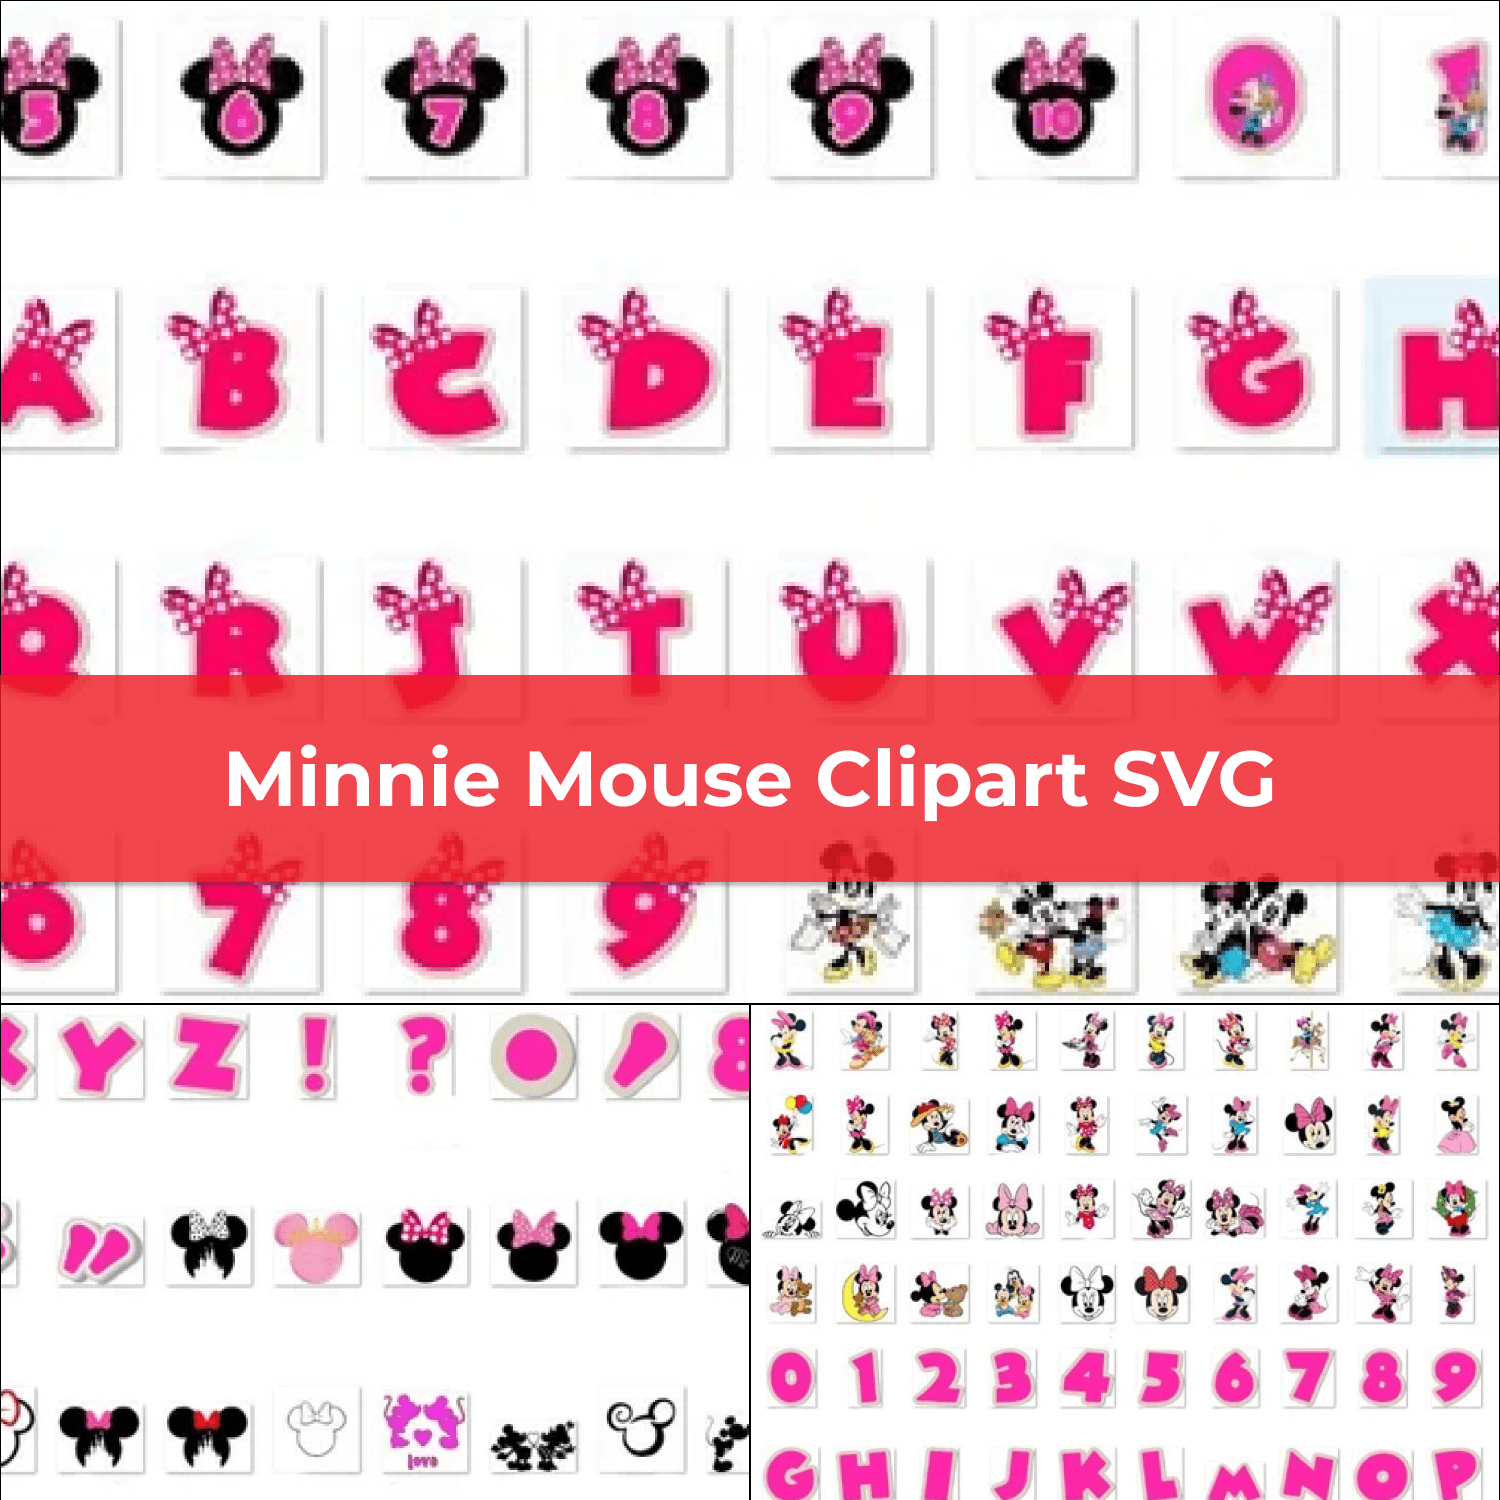 Minnie Mouse Clipart SVG Digital Download.